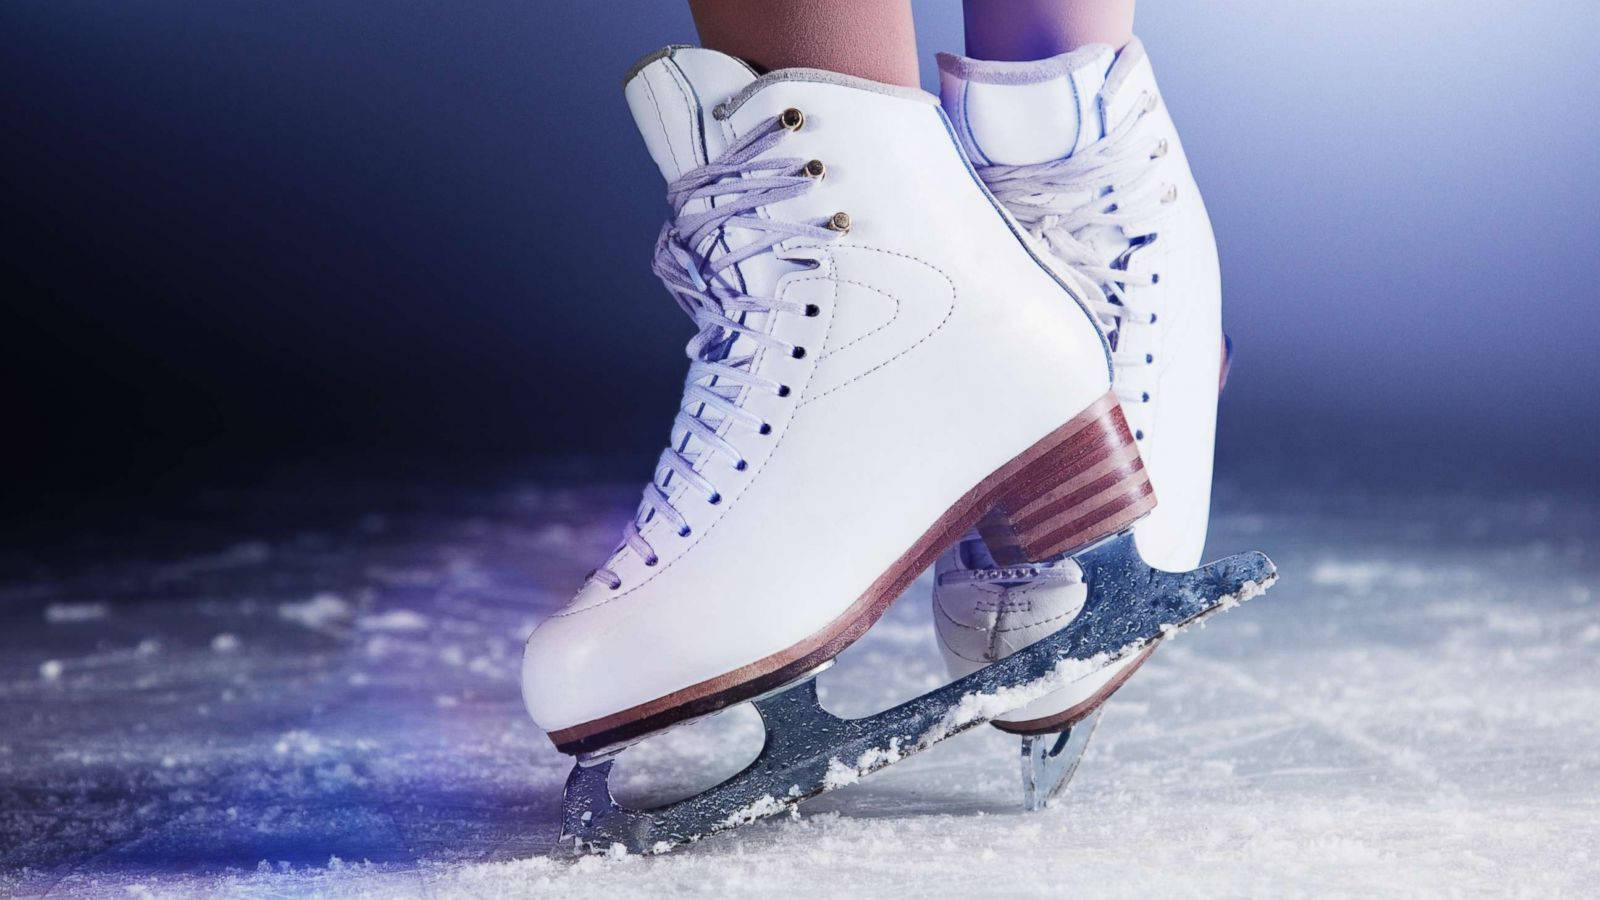 "Gliding Into Fun with Ice Skating Shoes" Wallpaper